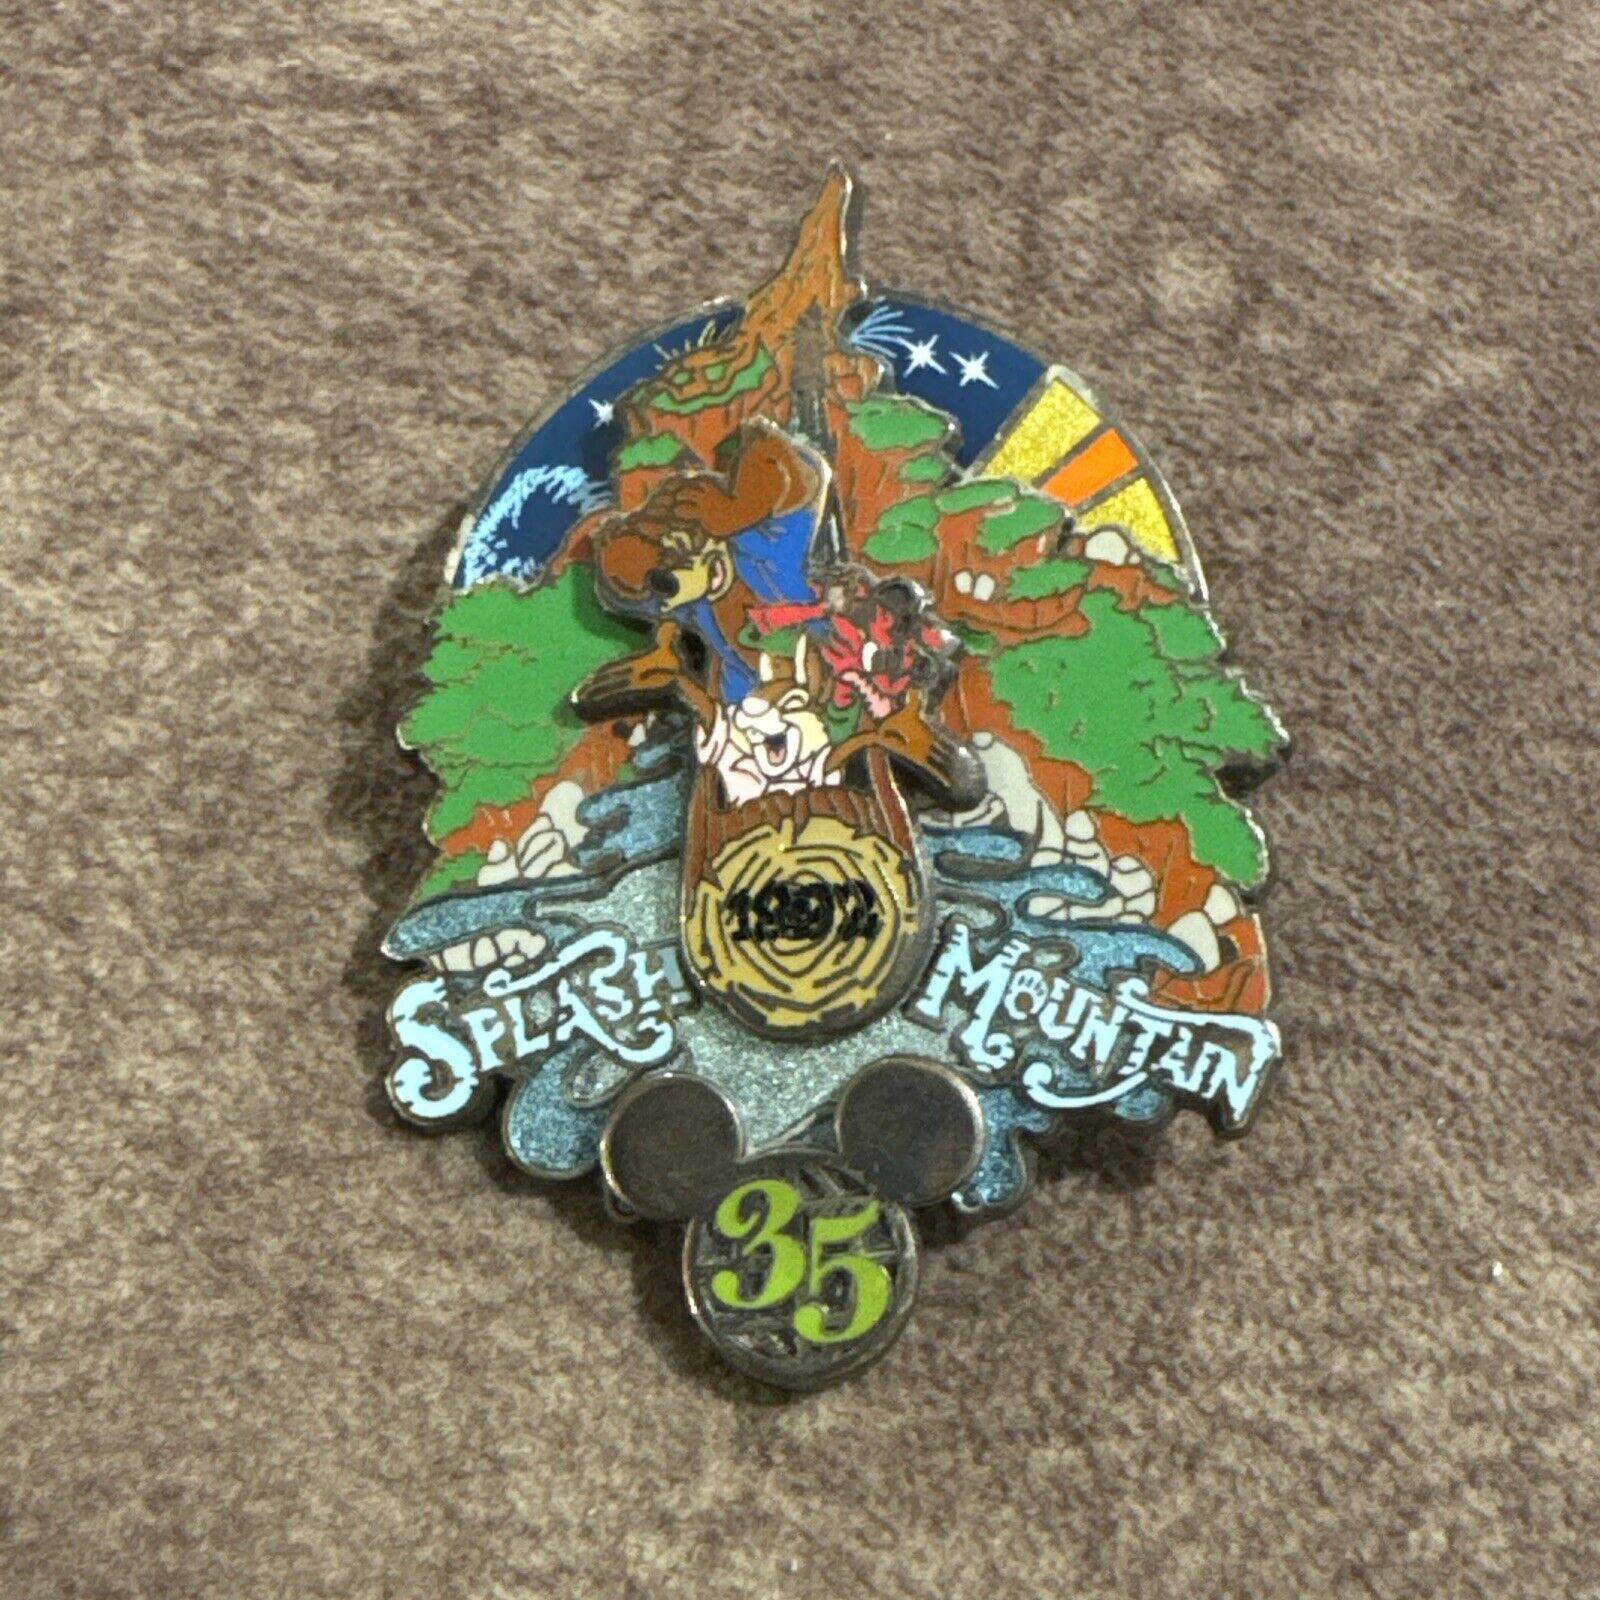 Hard To Find Splash Mountain 35th Anniversary Pin See Pics